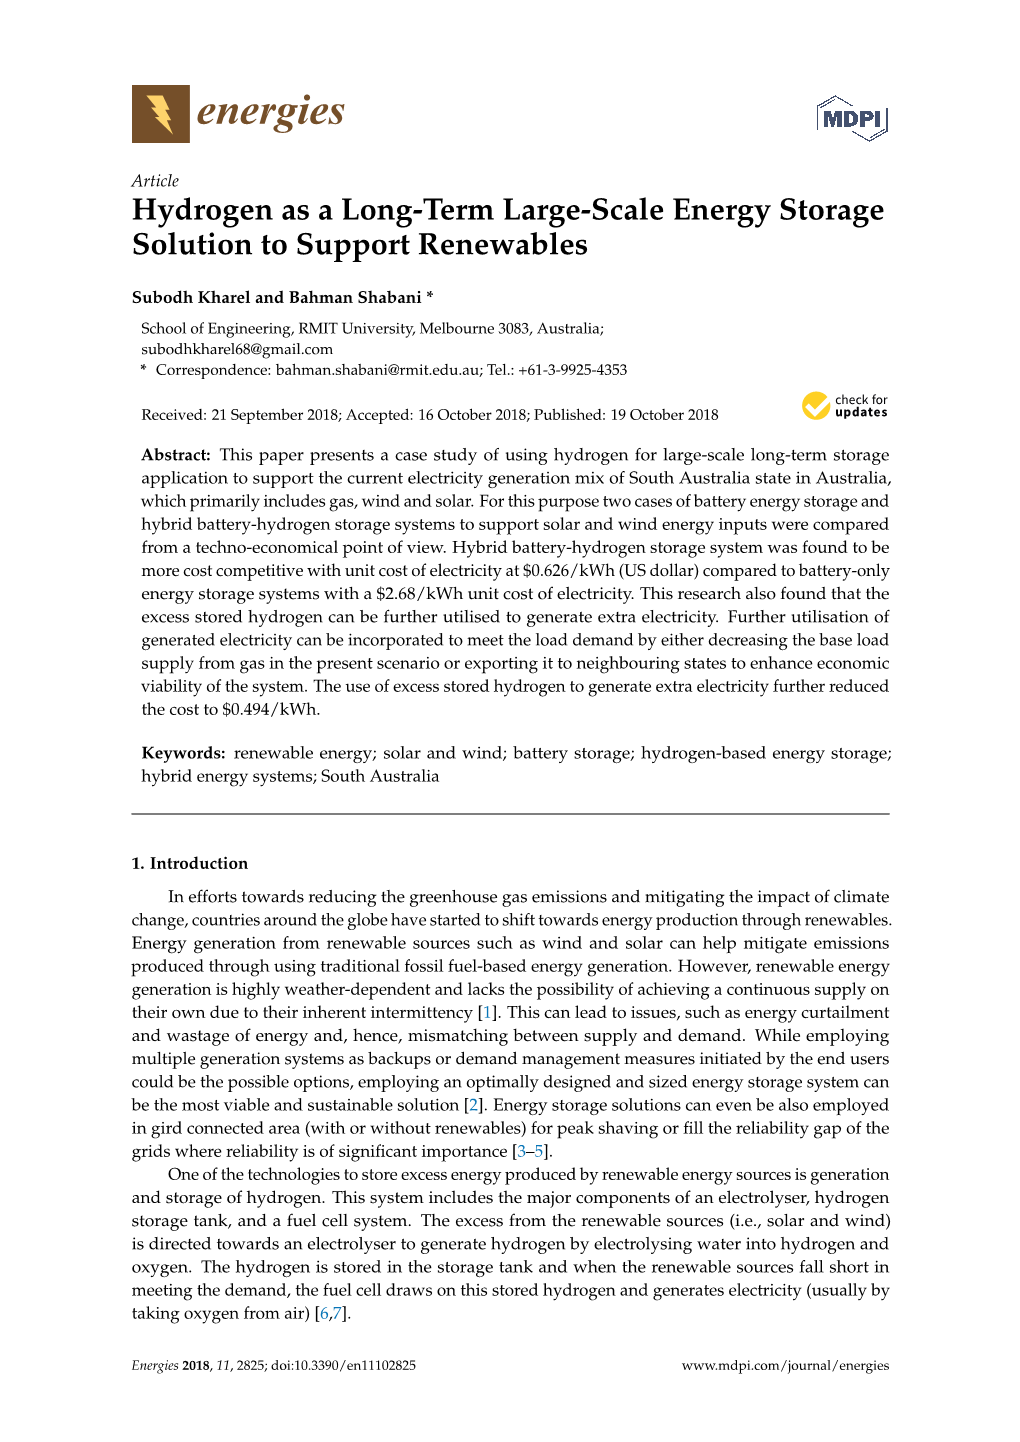 Hydrogen As a Long-Term Large-Scale Energy Storage Solution to Support Renewables